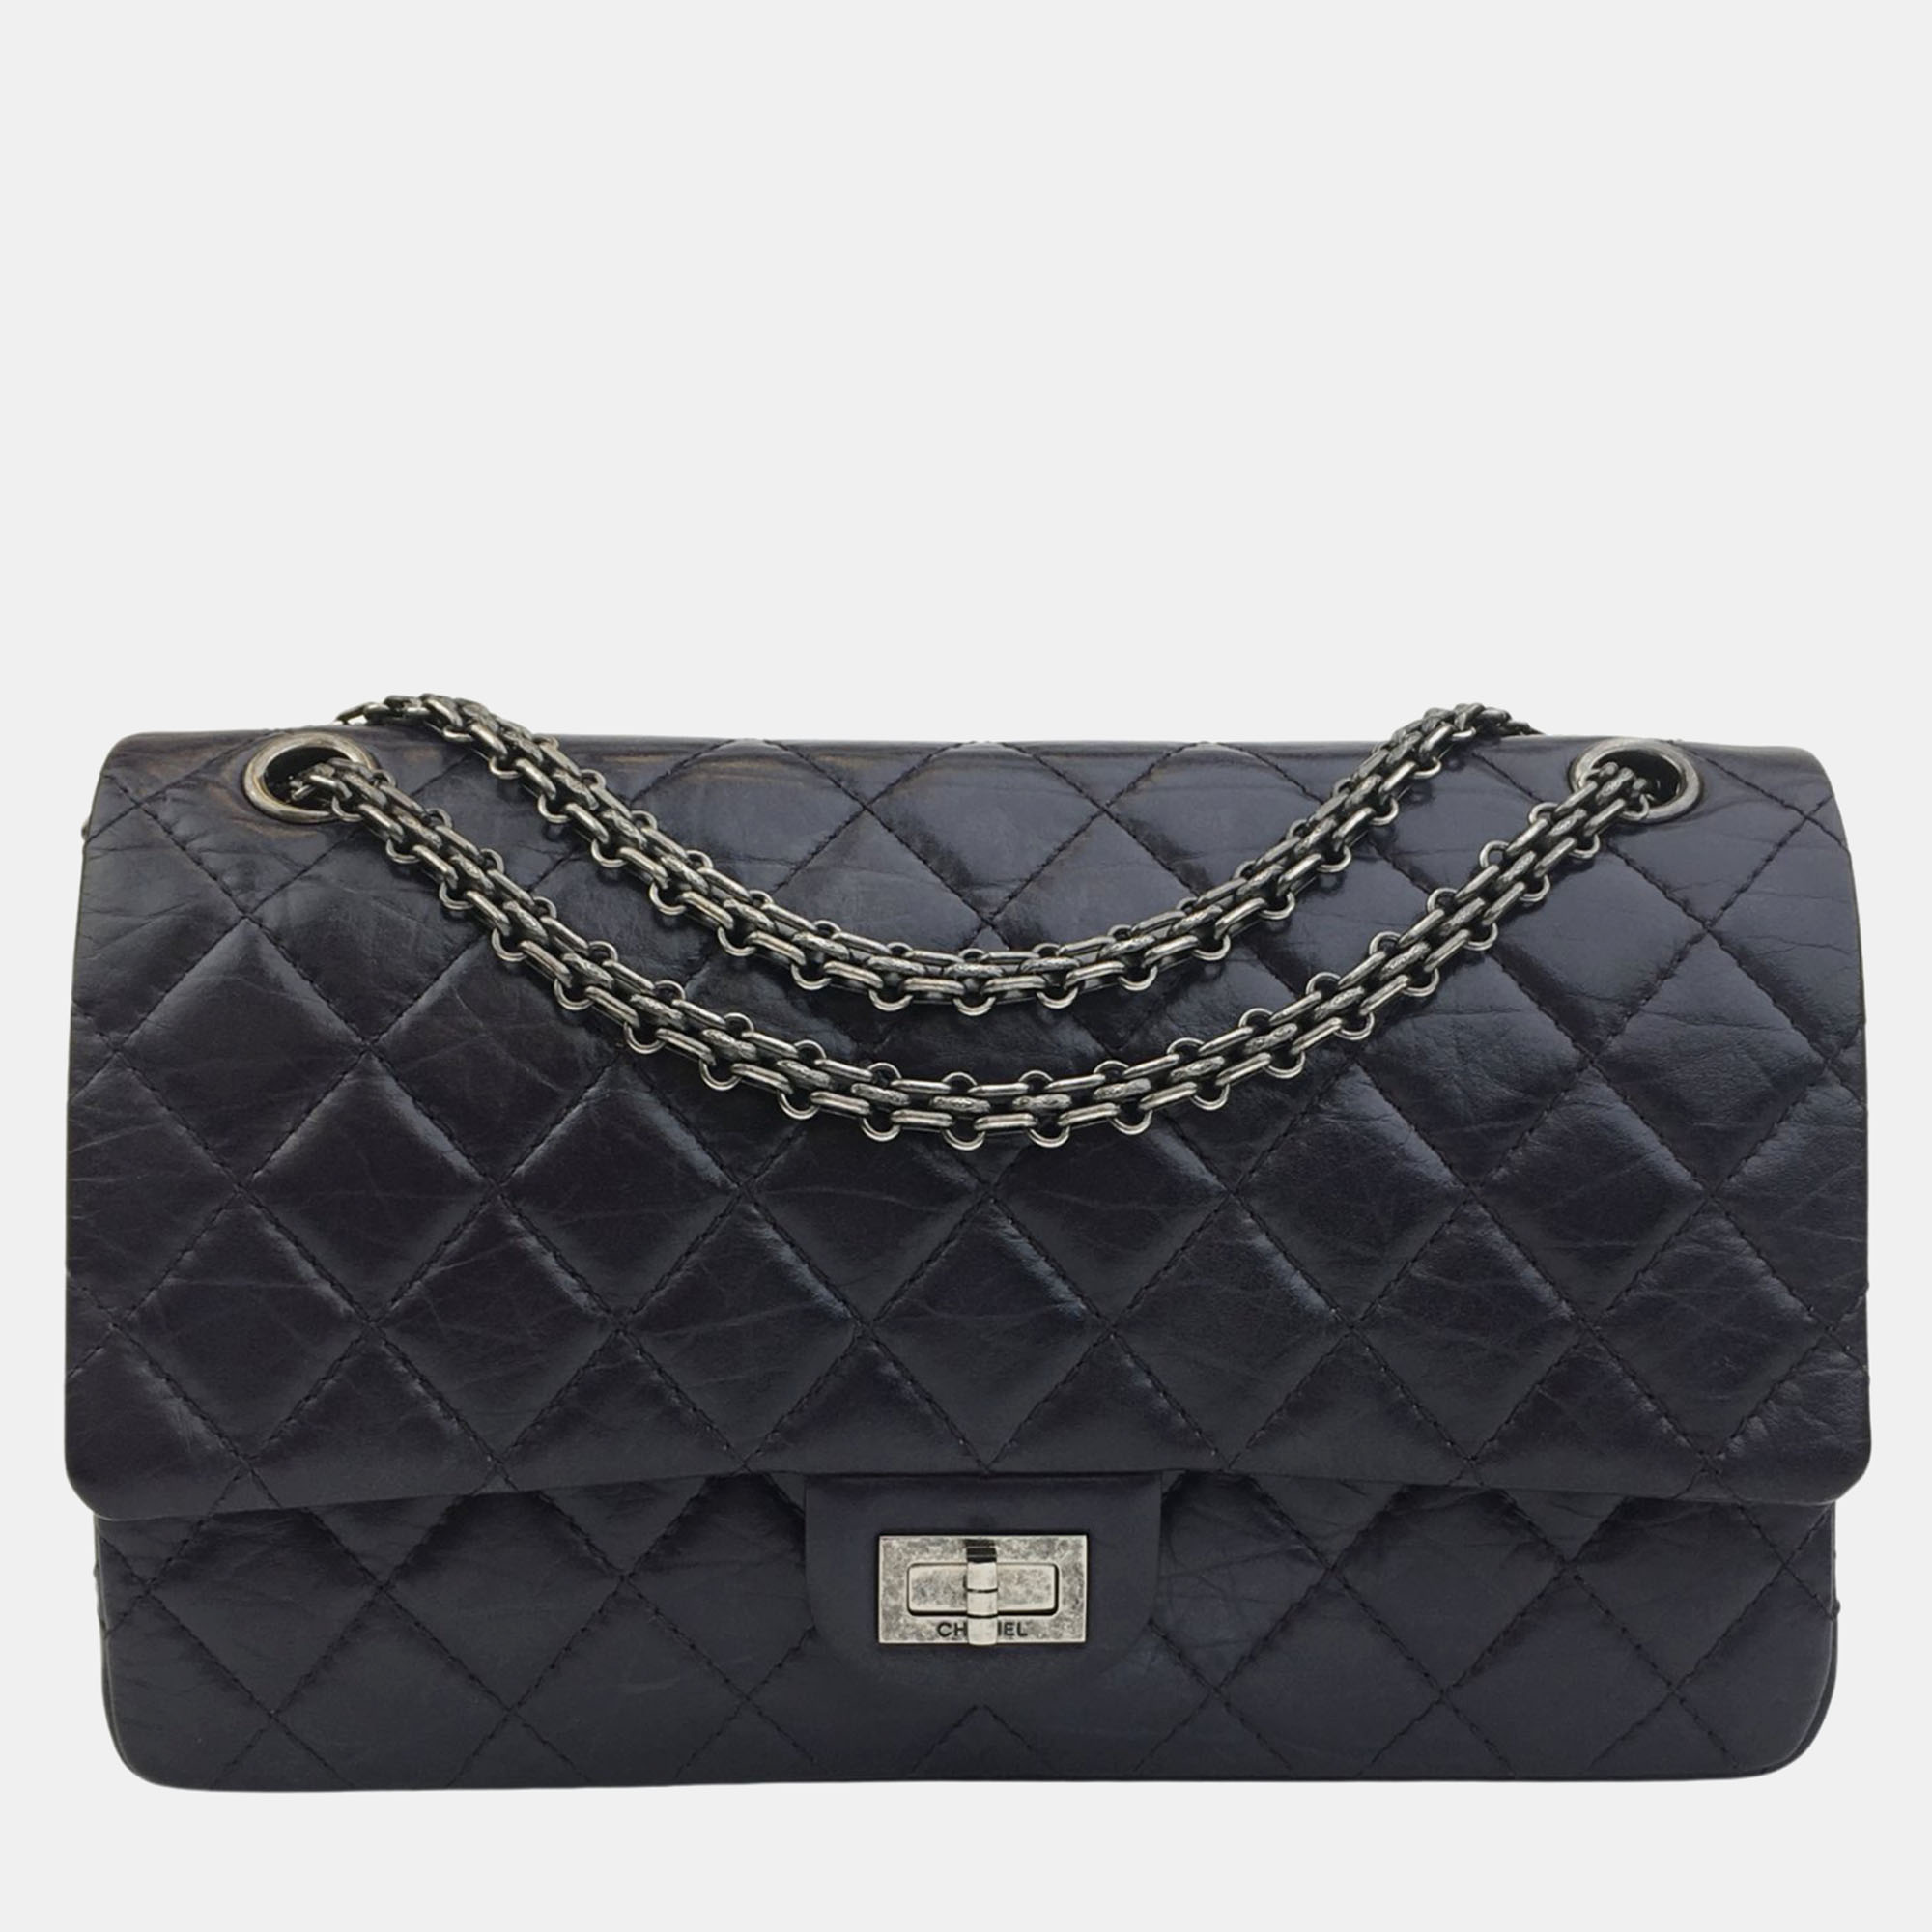 

Chanel Black Quilted Aged Calfskin 2.55 Reissue 227 Double Flap Shoulder Bag